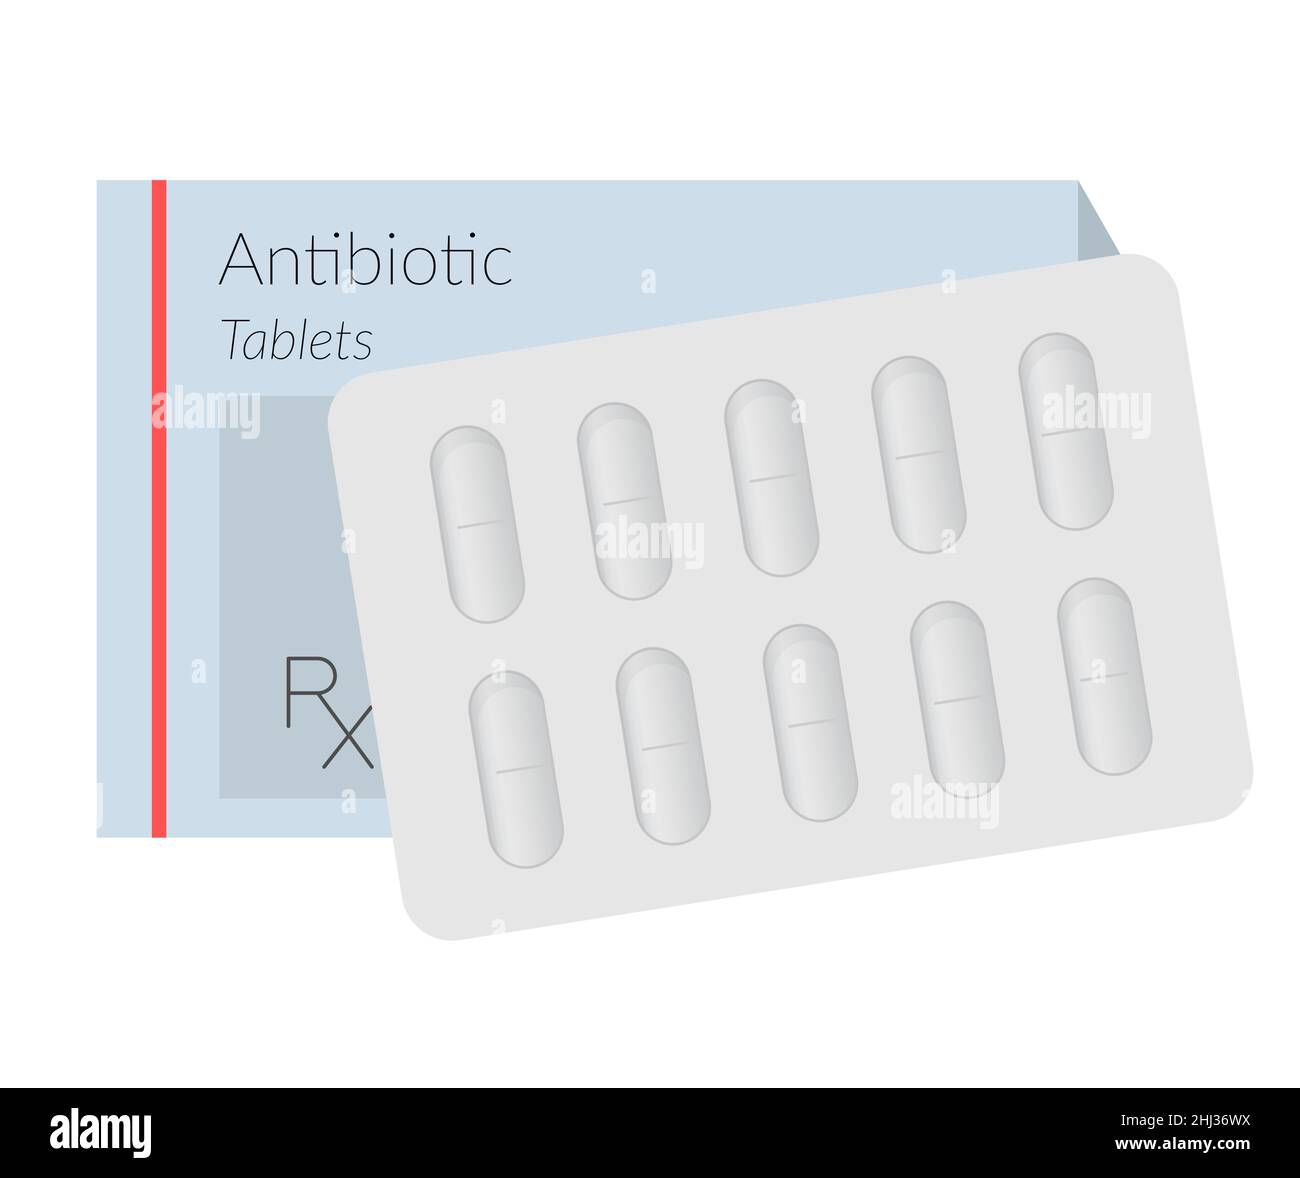 Anti-Microbial Resistance (AMR) - Antibiotic Medicine Pack with Redline - Illustration as EPS 10 File Stock Vector